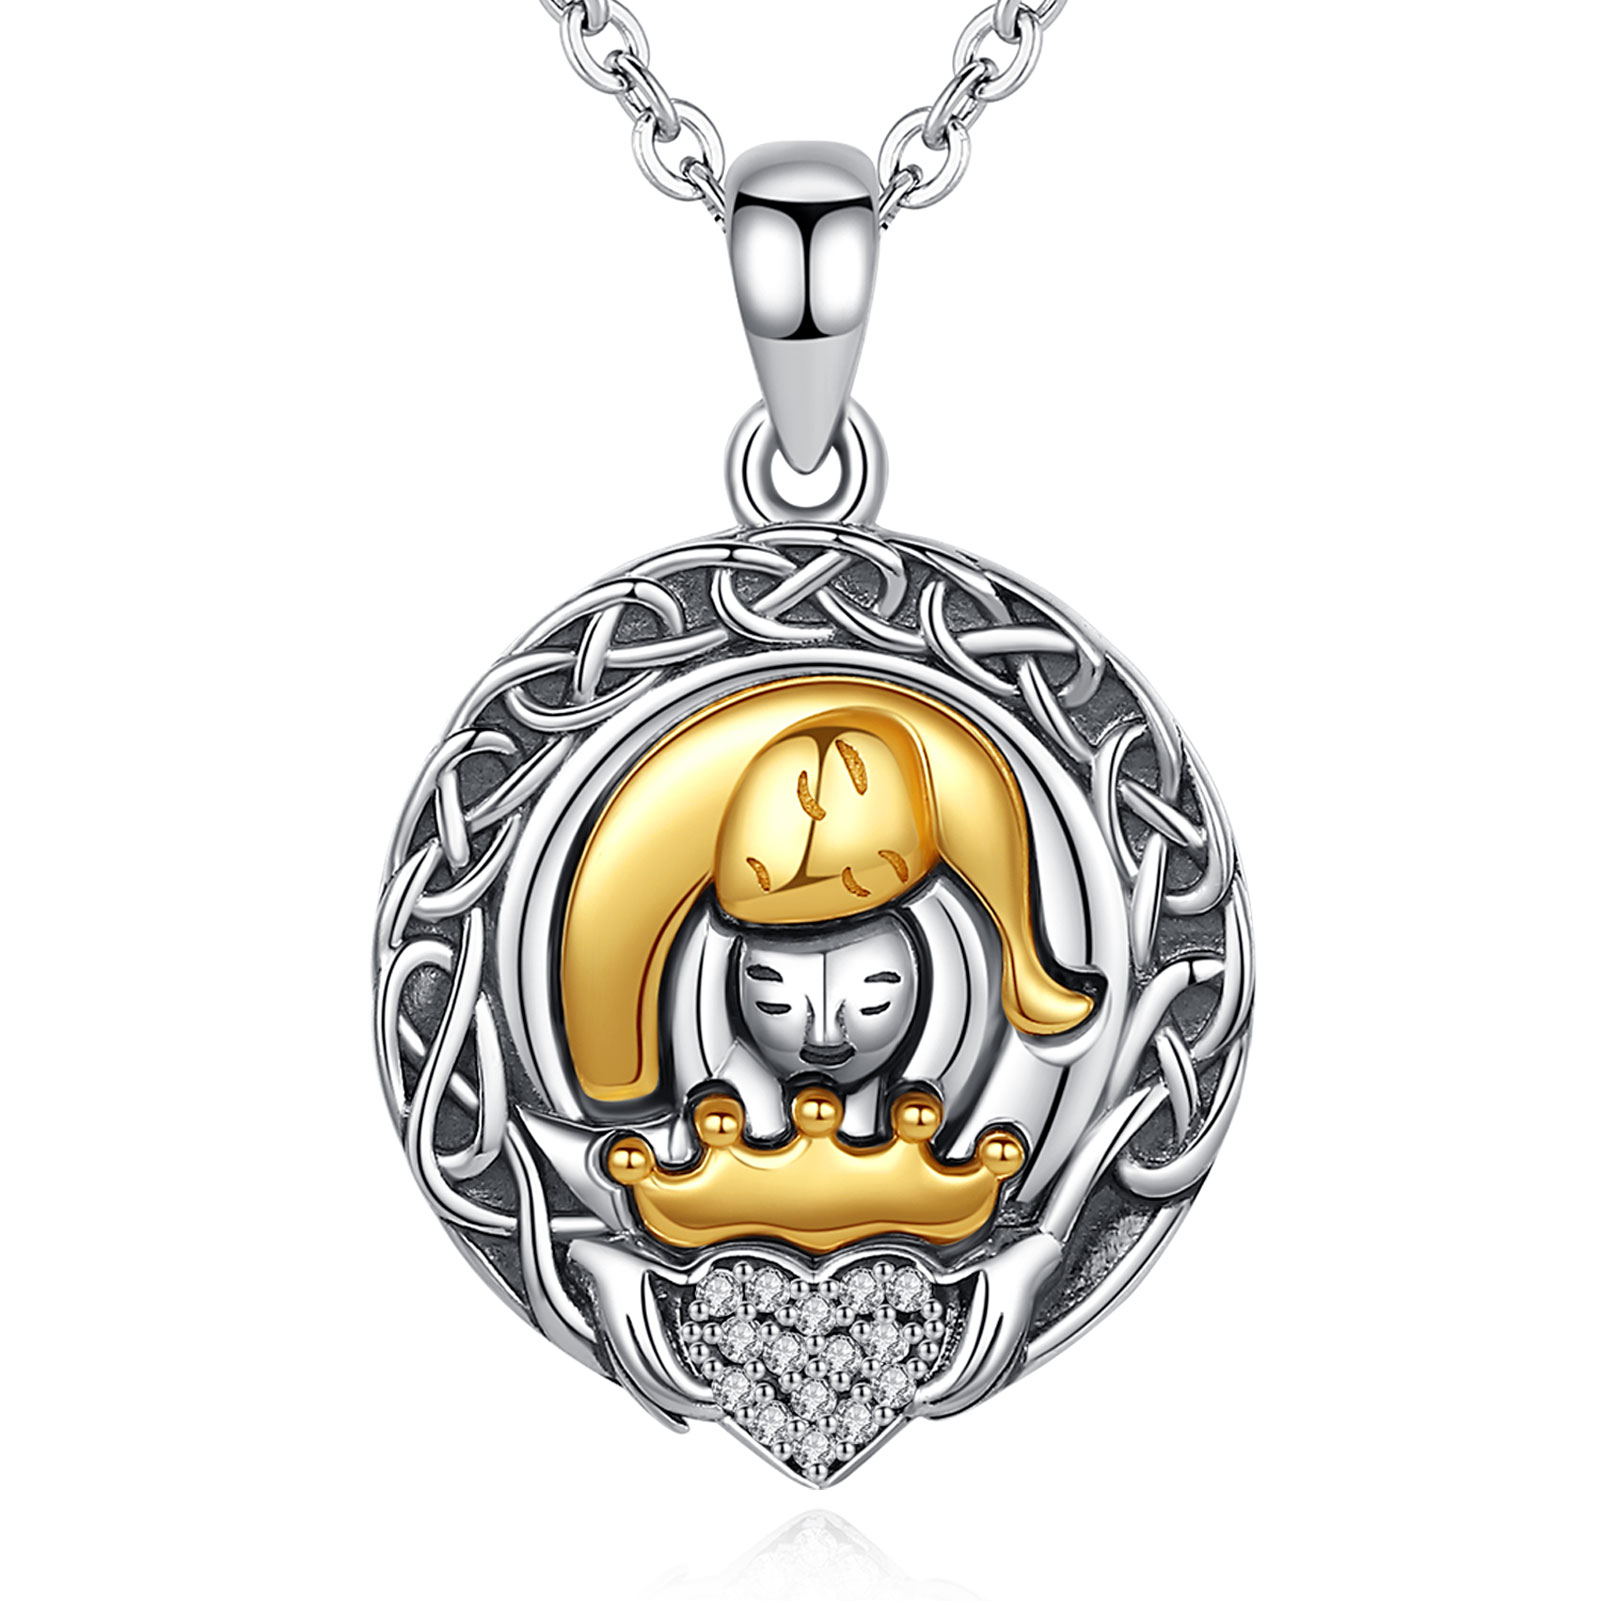 Merryshine Jewelry 925 Sterling Silver Claddagh Mom And Baby Daughter Necklace for Mothers Day